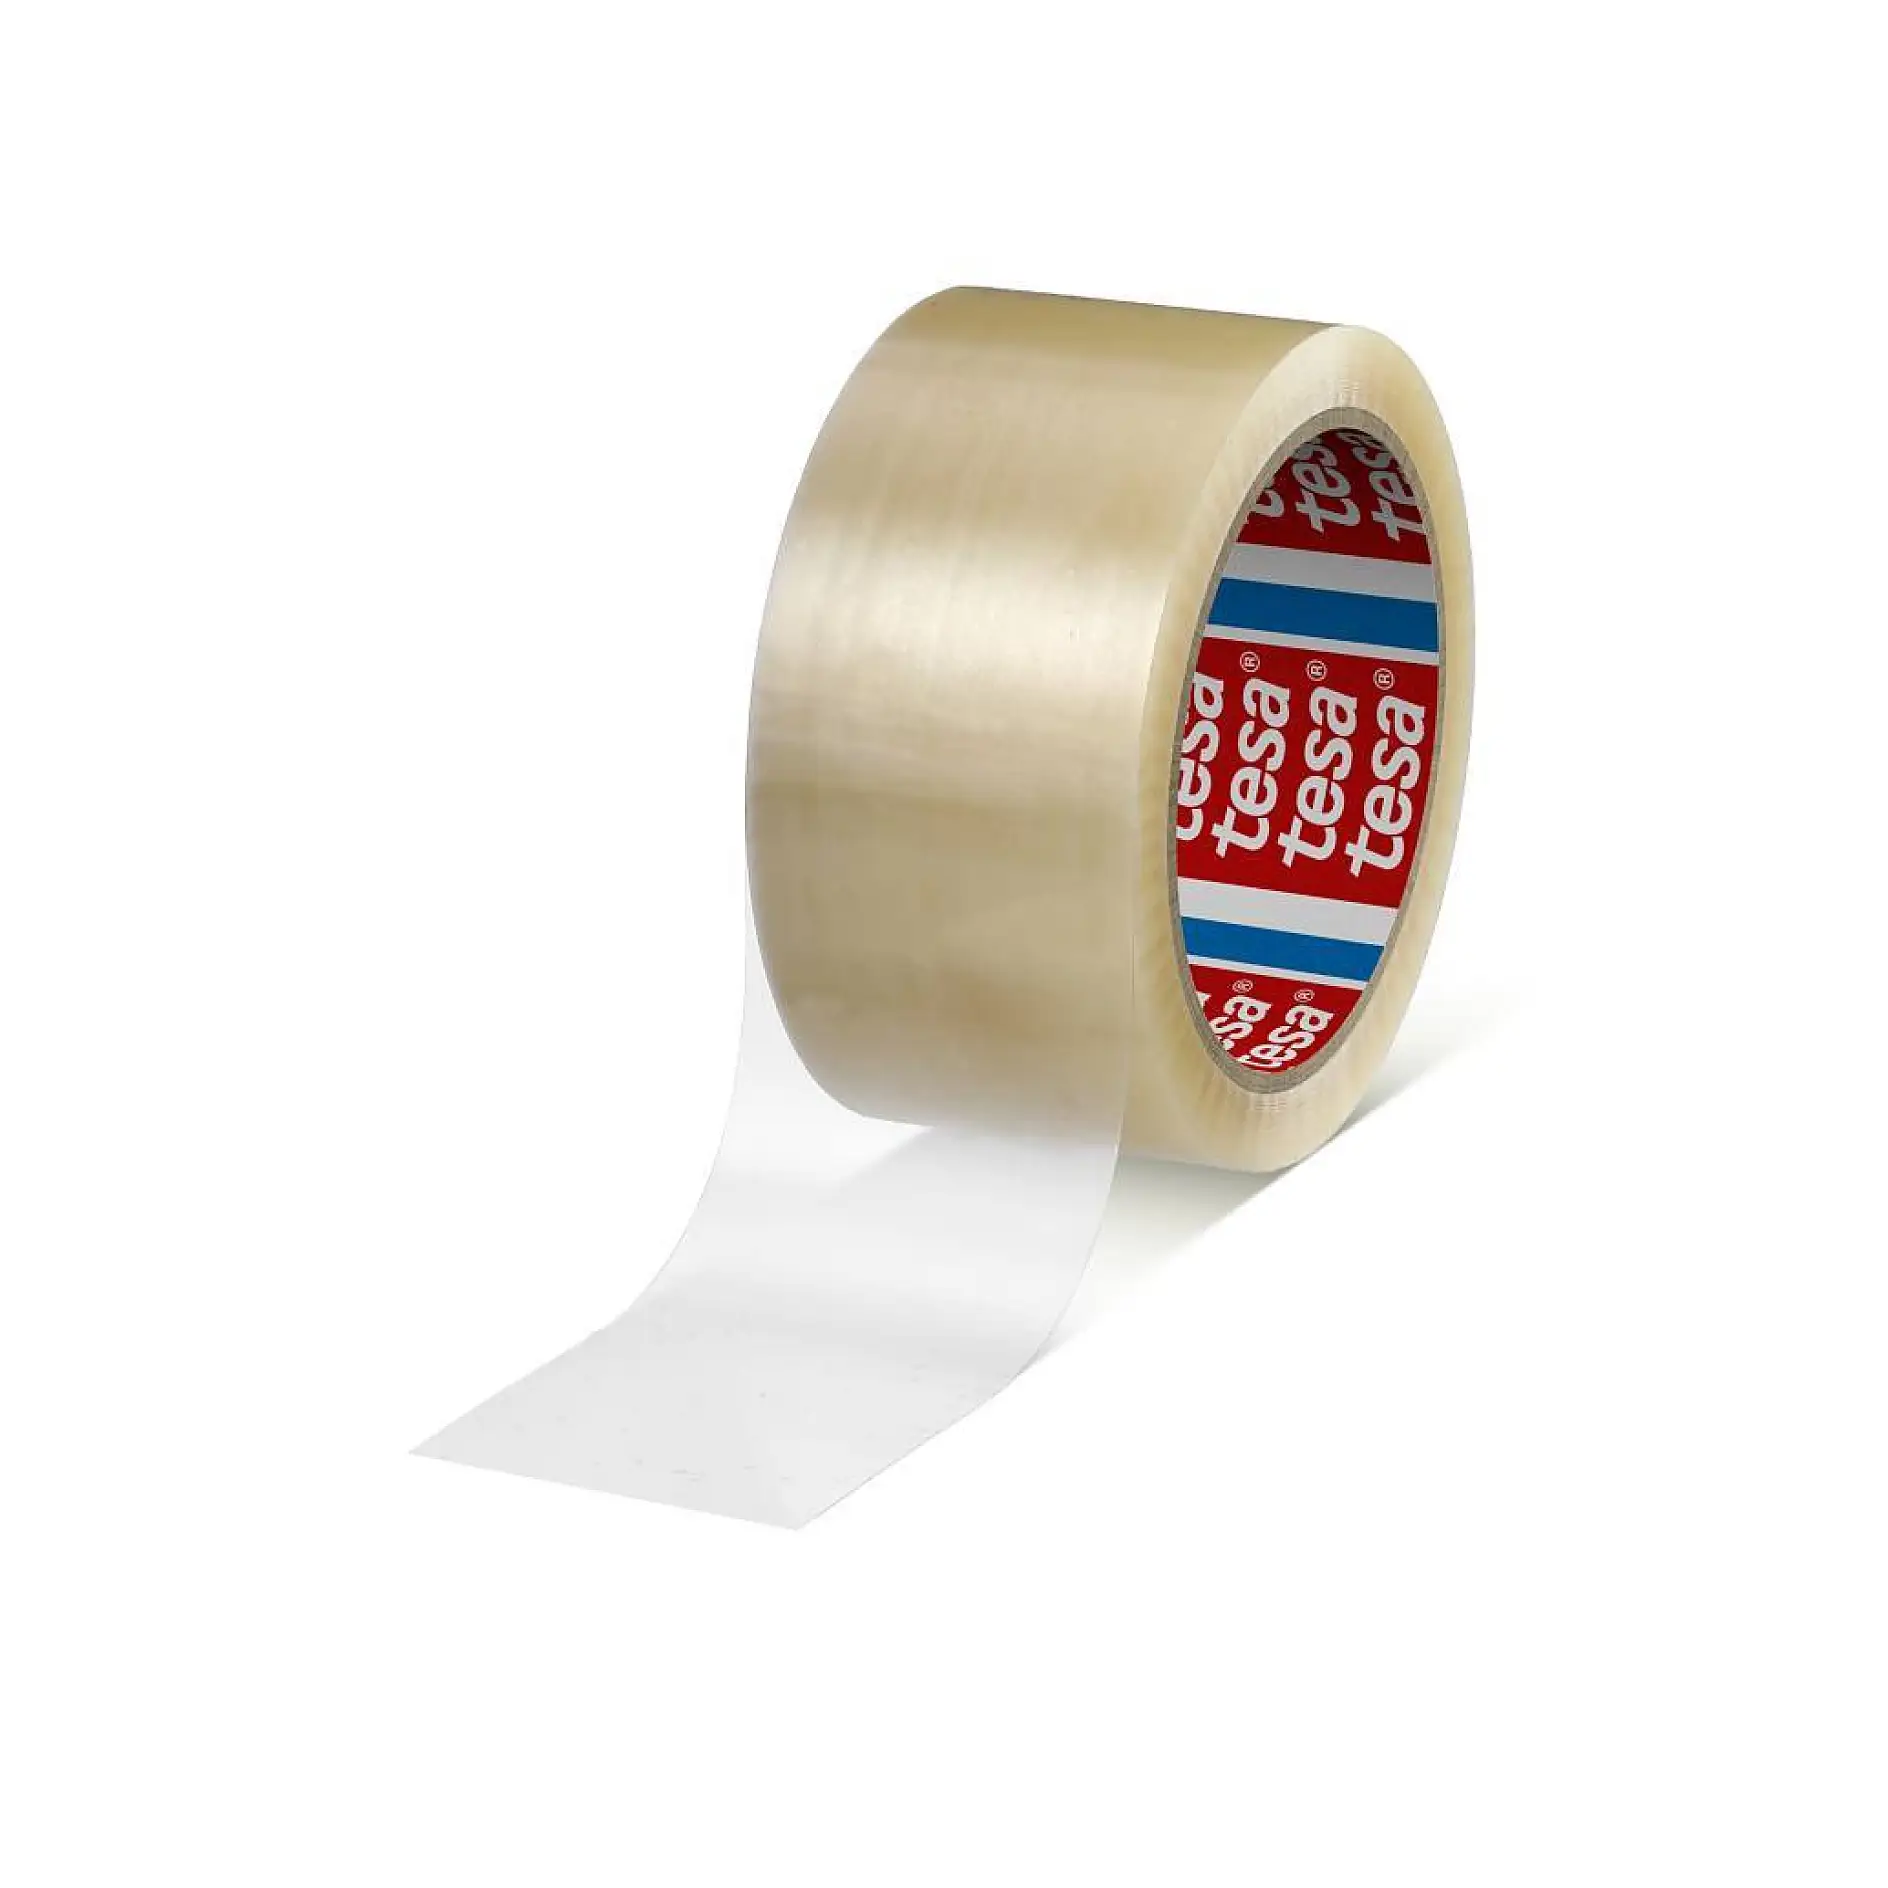 tesa-4280-pv0-pp-shipping-tape-strong-adhesion-transparent-042800004500-pr,1557441_canvas1x1_10